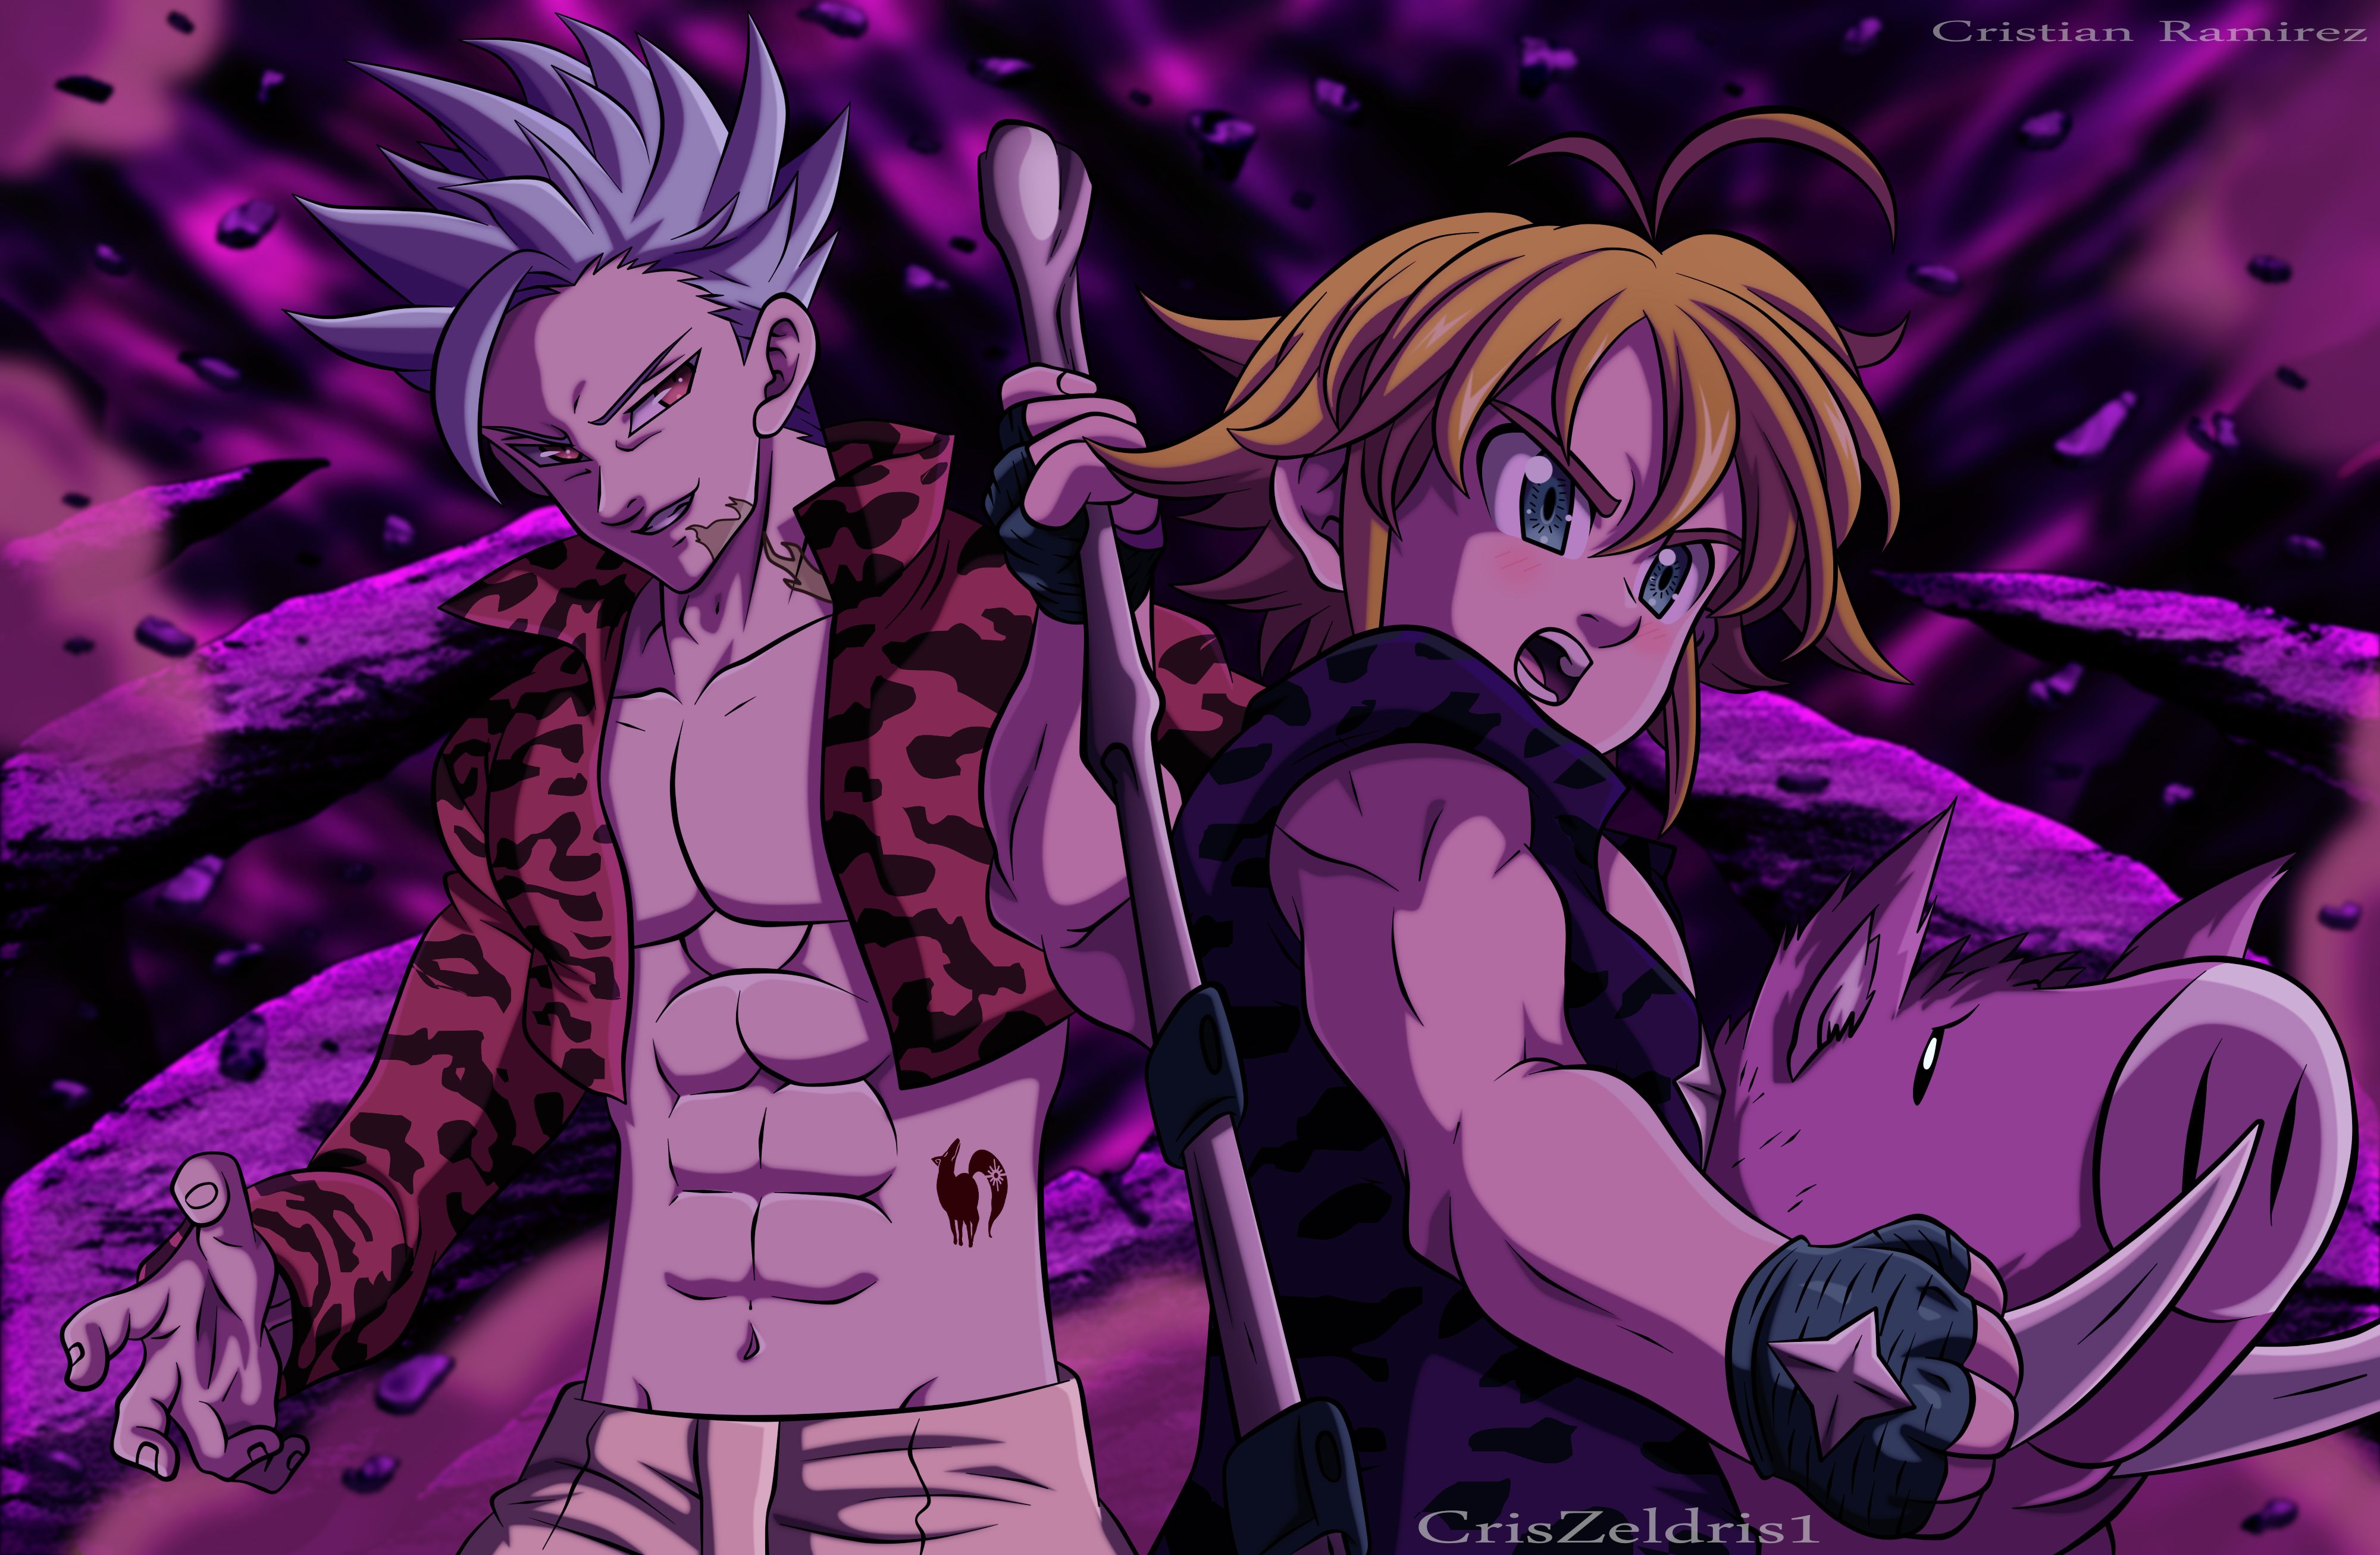 The Seven Deadly Sins 4k Ultra HD Wallpaper. Background Image